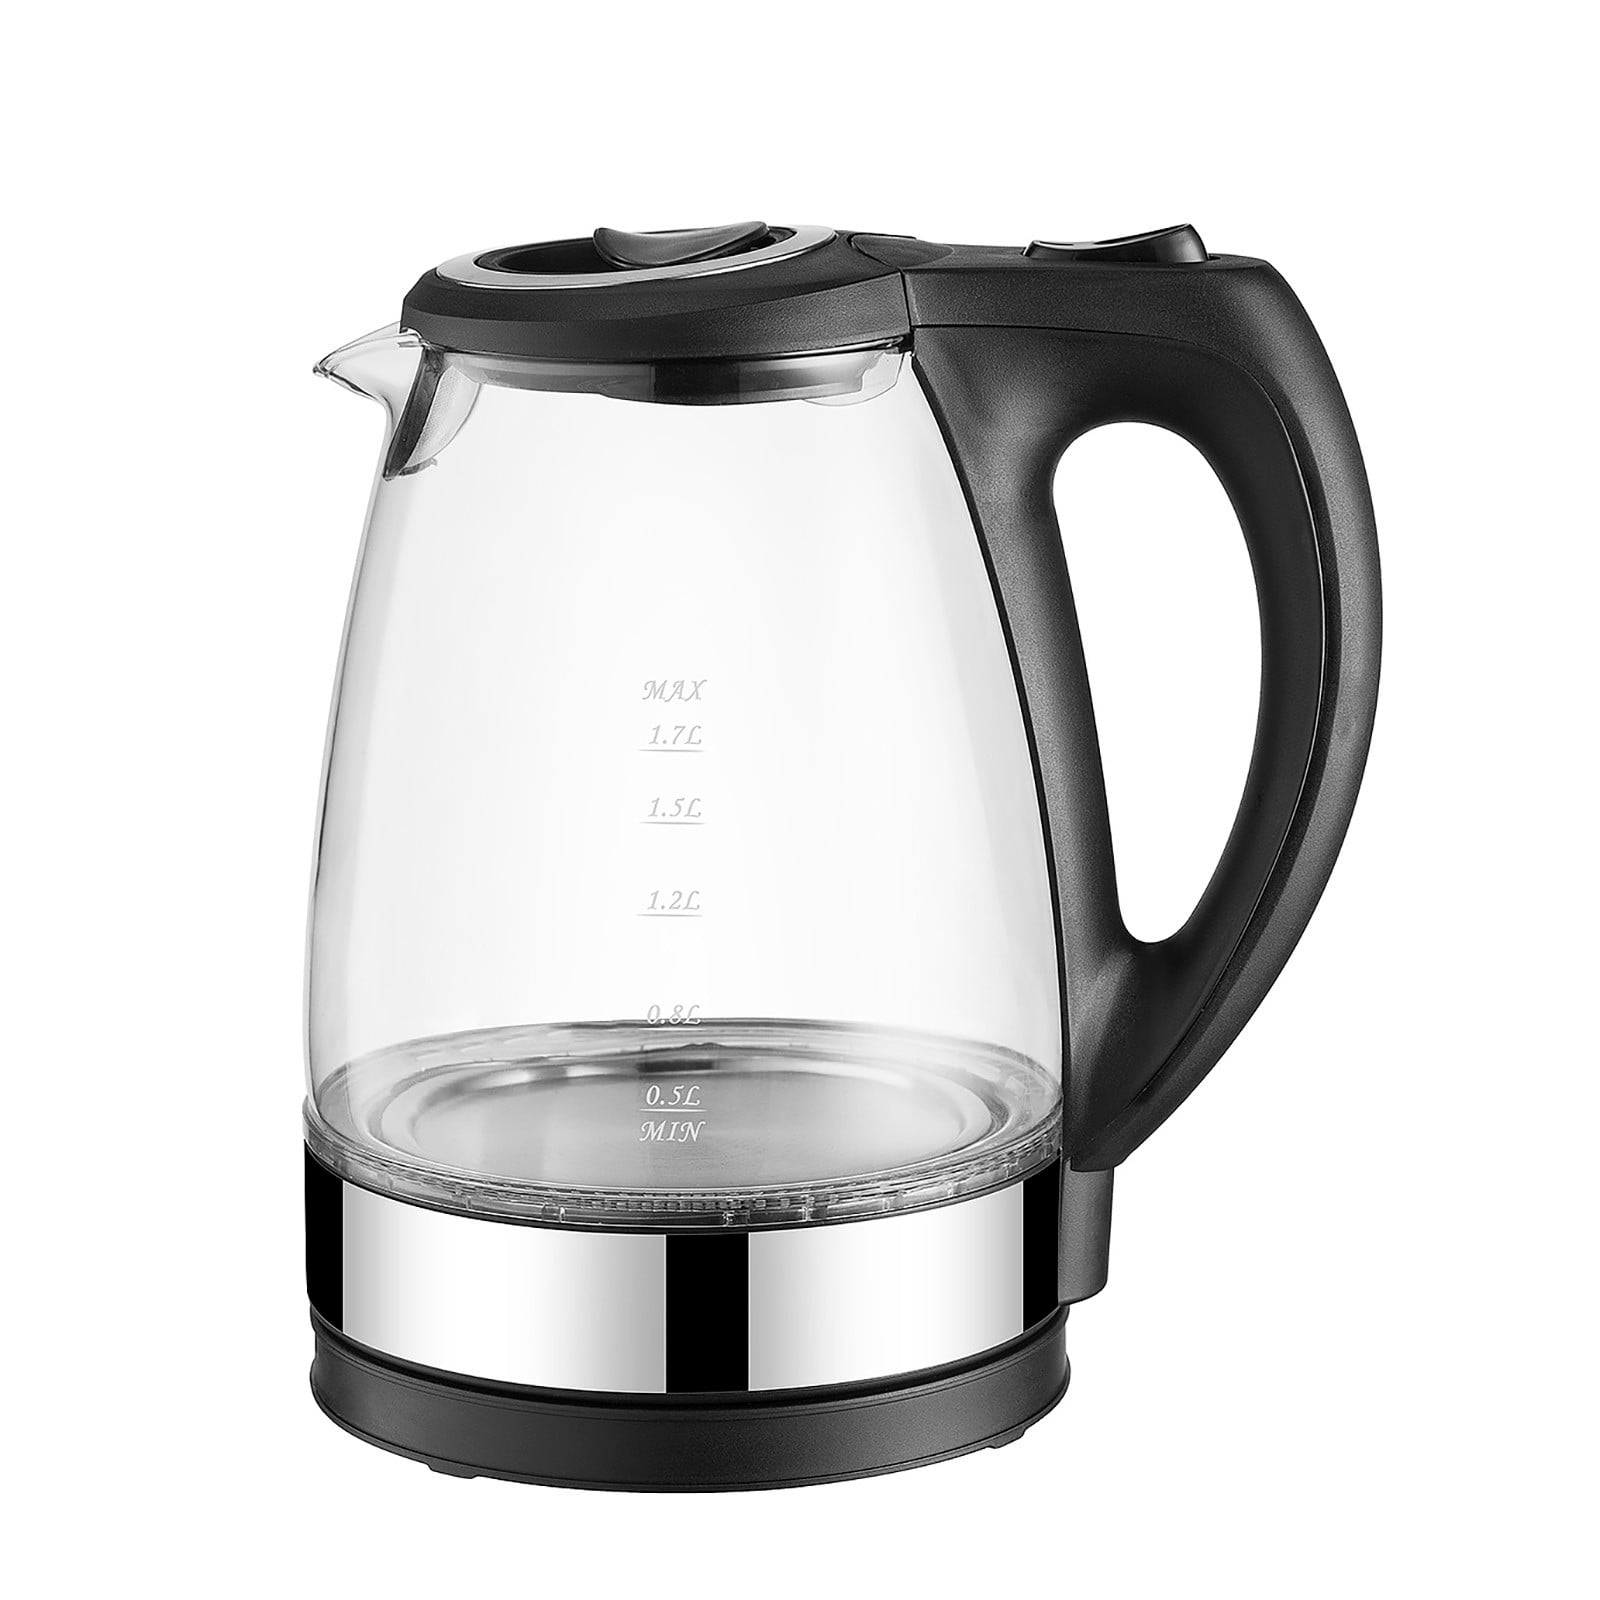 2200W Kettle Household Fast Boiling Water Automatic Electric